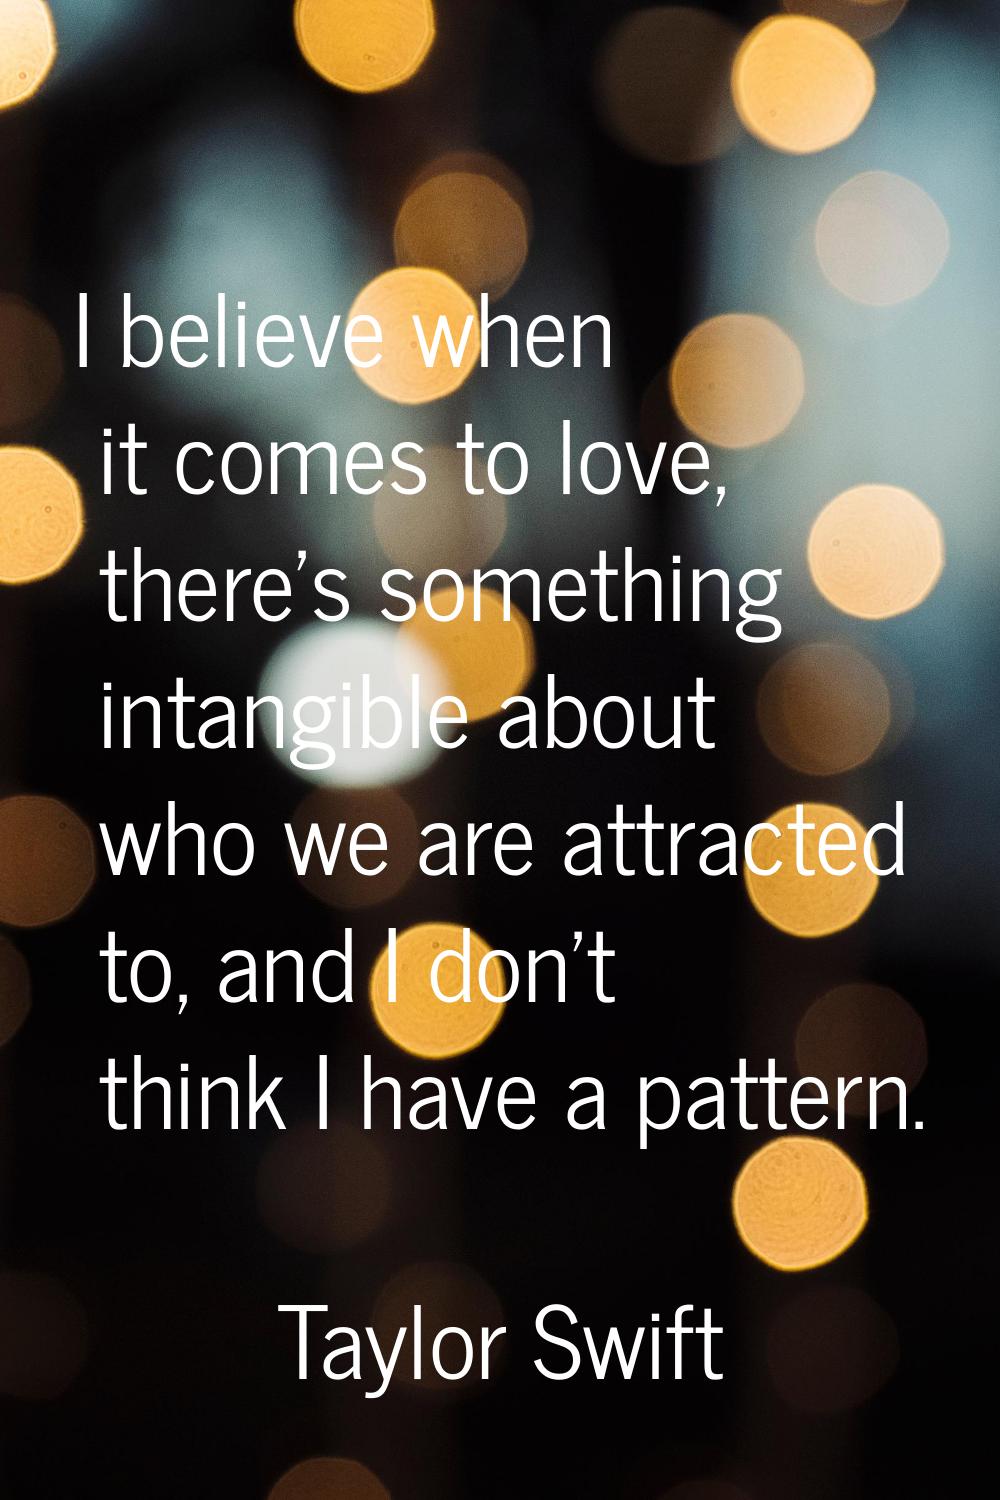 I believe when it comes to love, there's something intangible about who we are attracted to, and I 